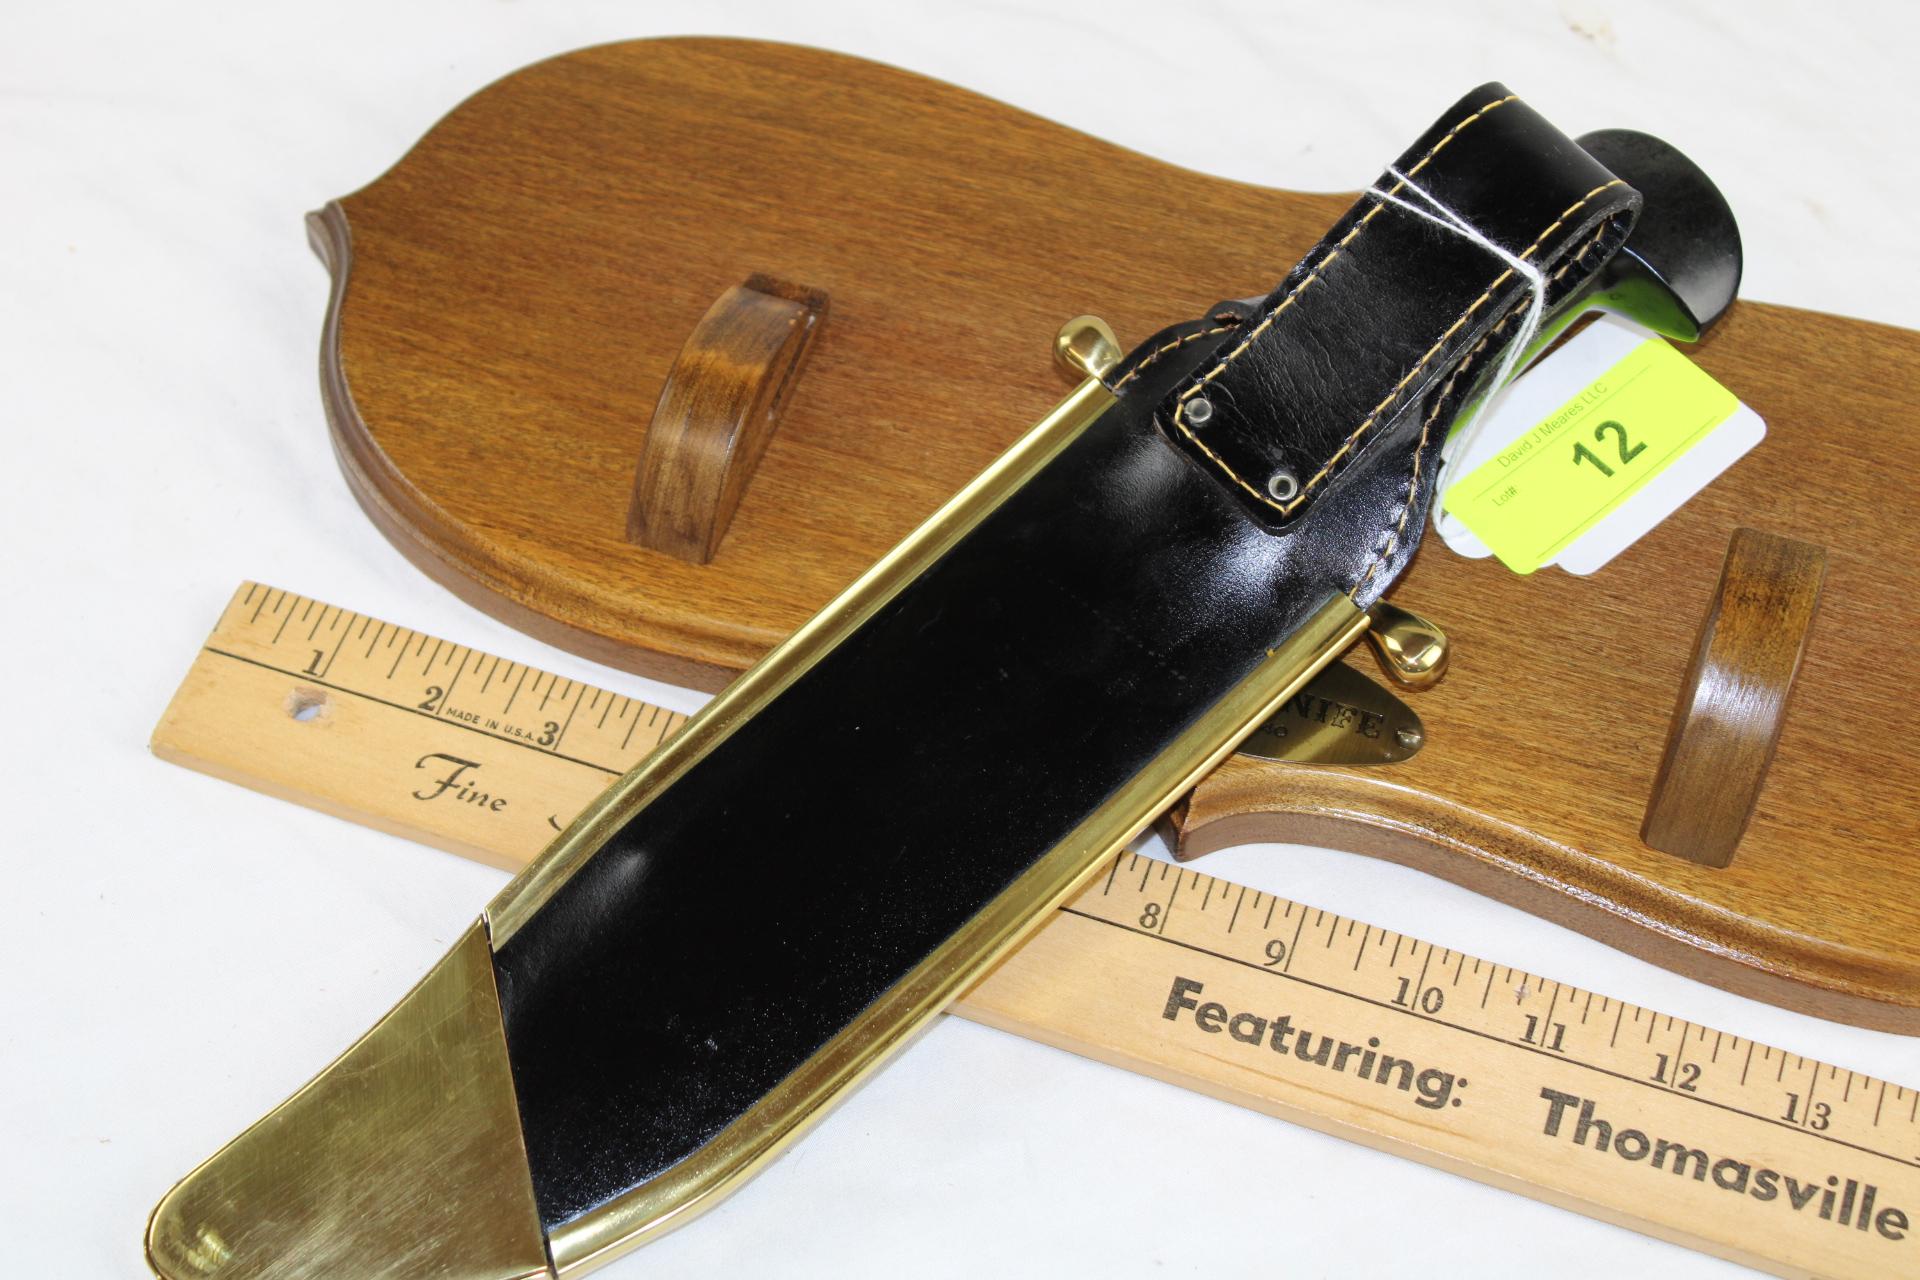 Case XX 1836 "Bowie Knife". Comes with Display and Sheath